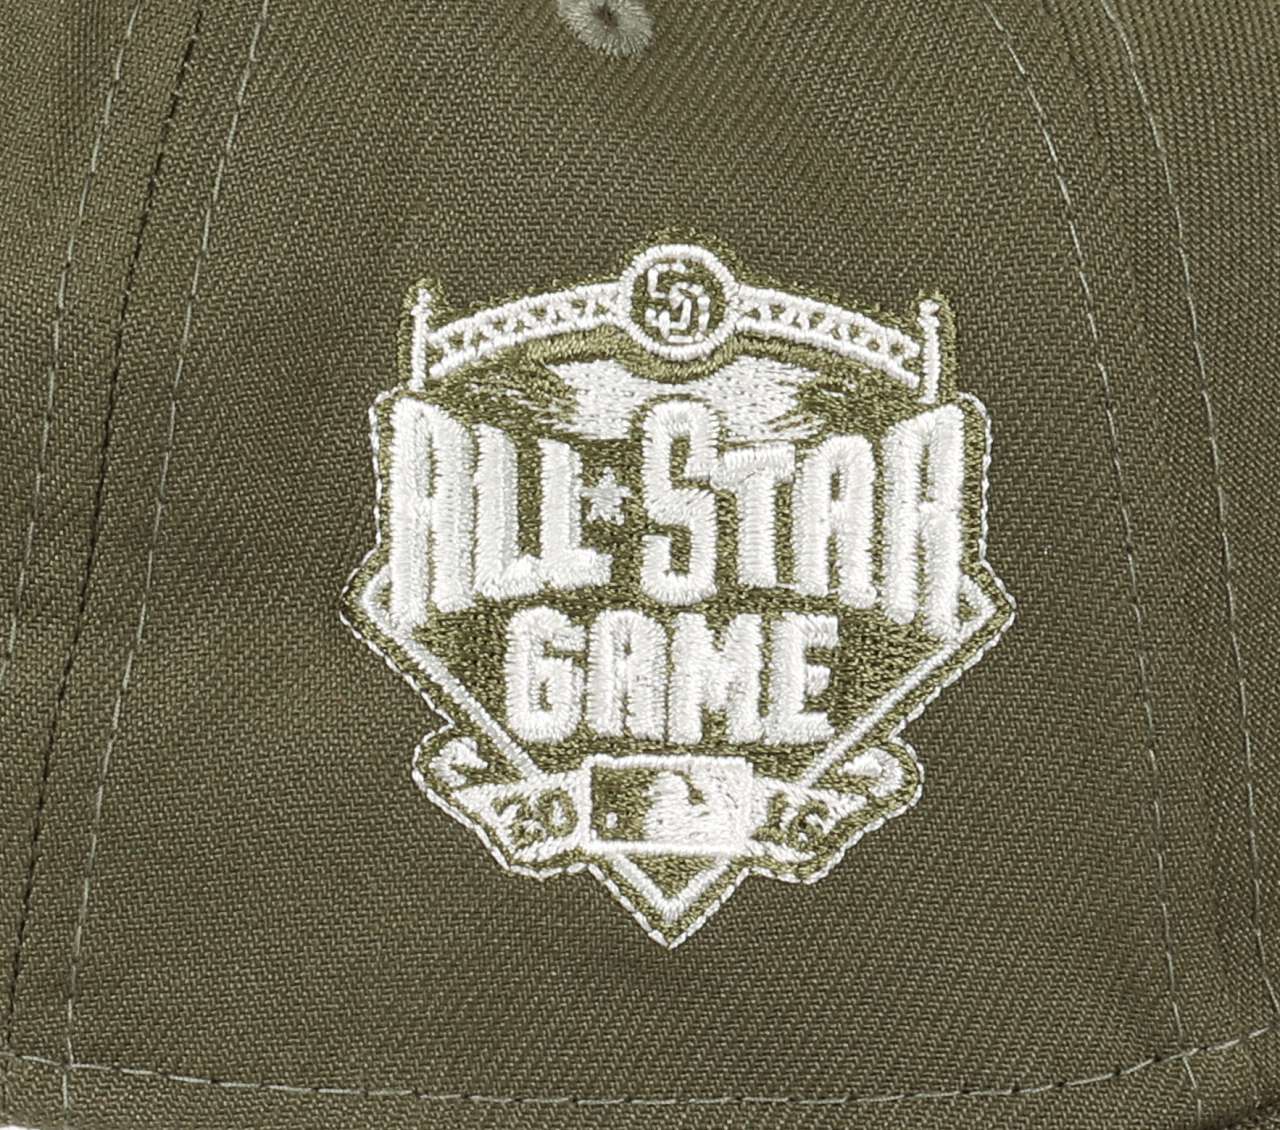 San Diego Padres MLB All-Star Game 2016 Sidepatch Cooperstown New Olive Forty A-Frame Snapback Cap New Era